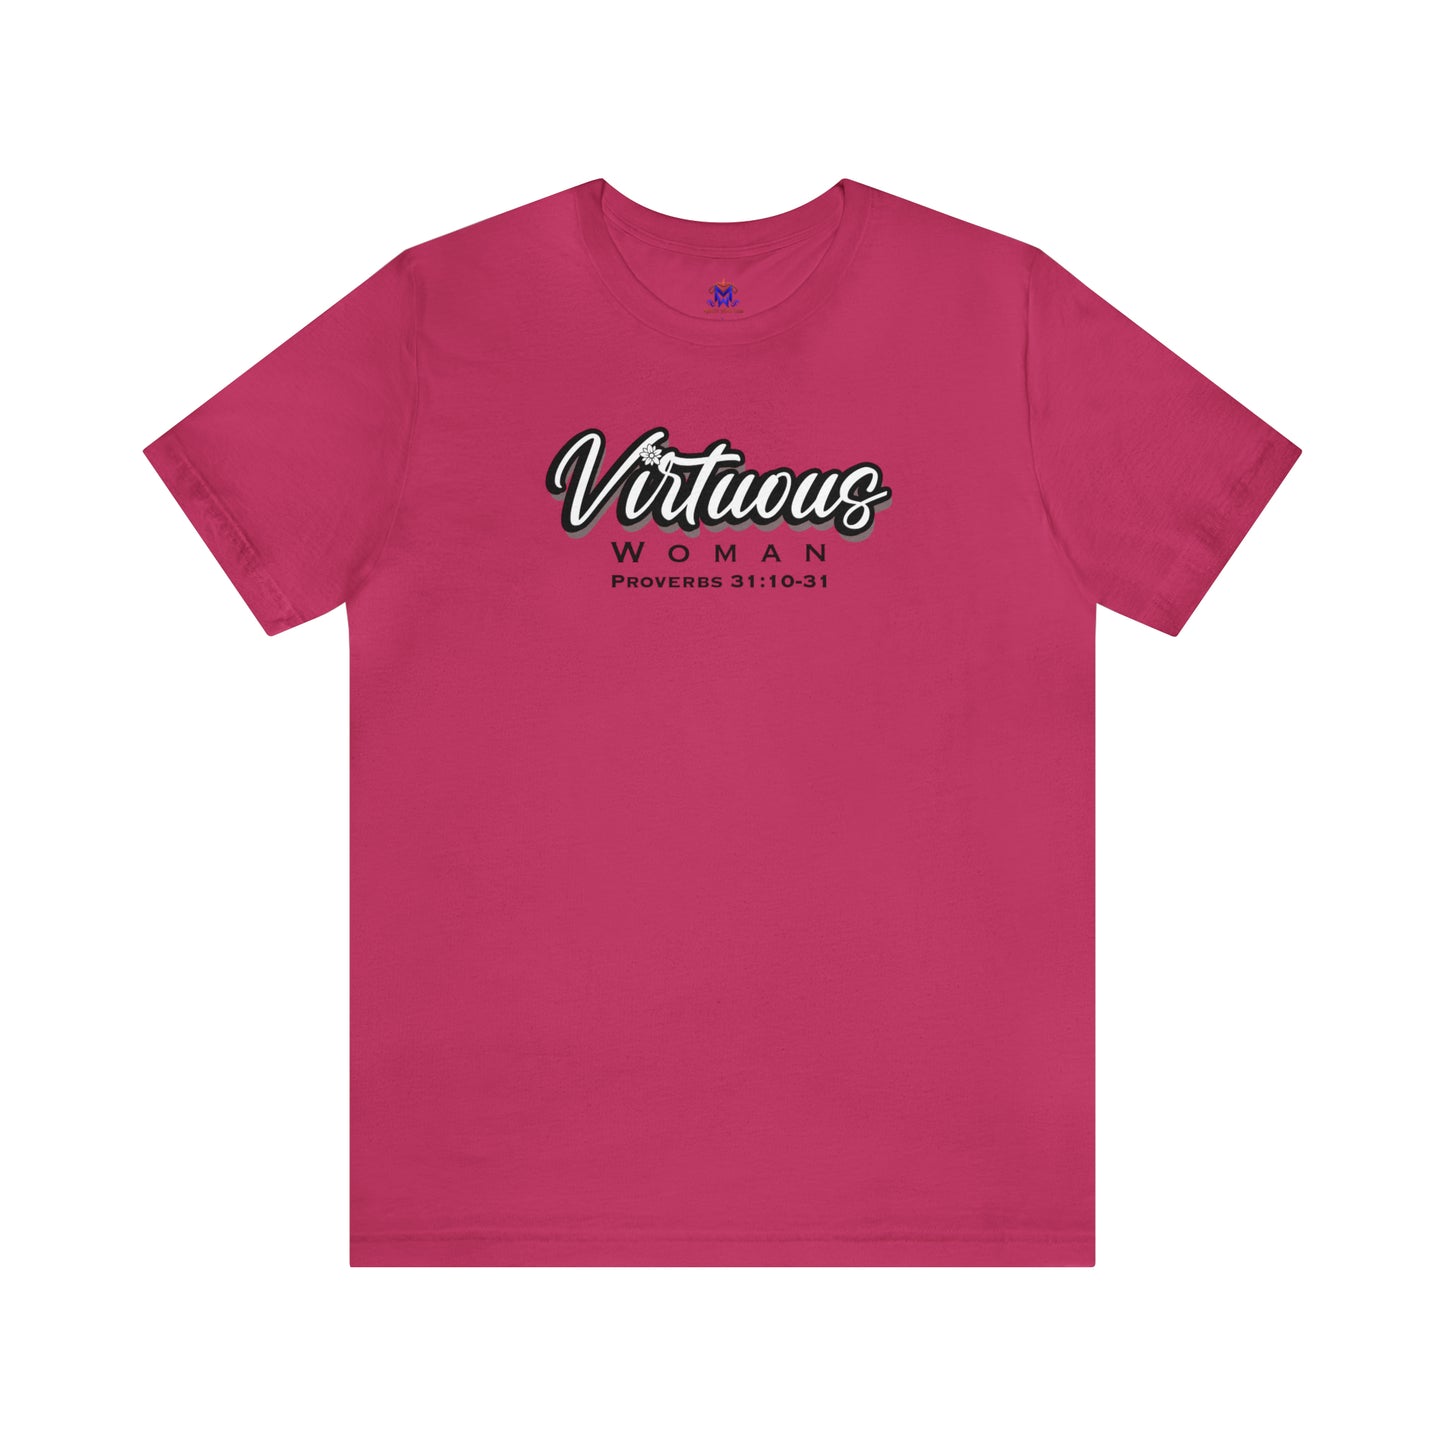 Virtuous Woman-(Available in more colors)